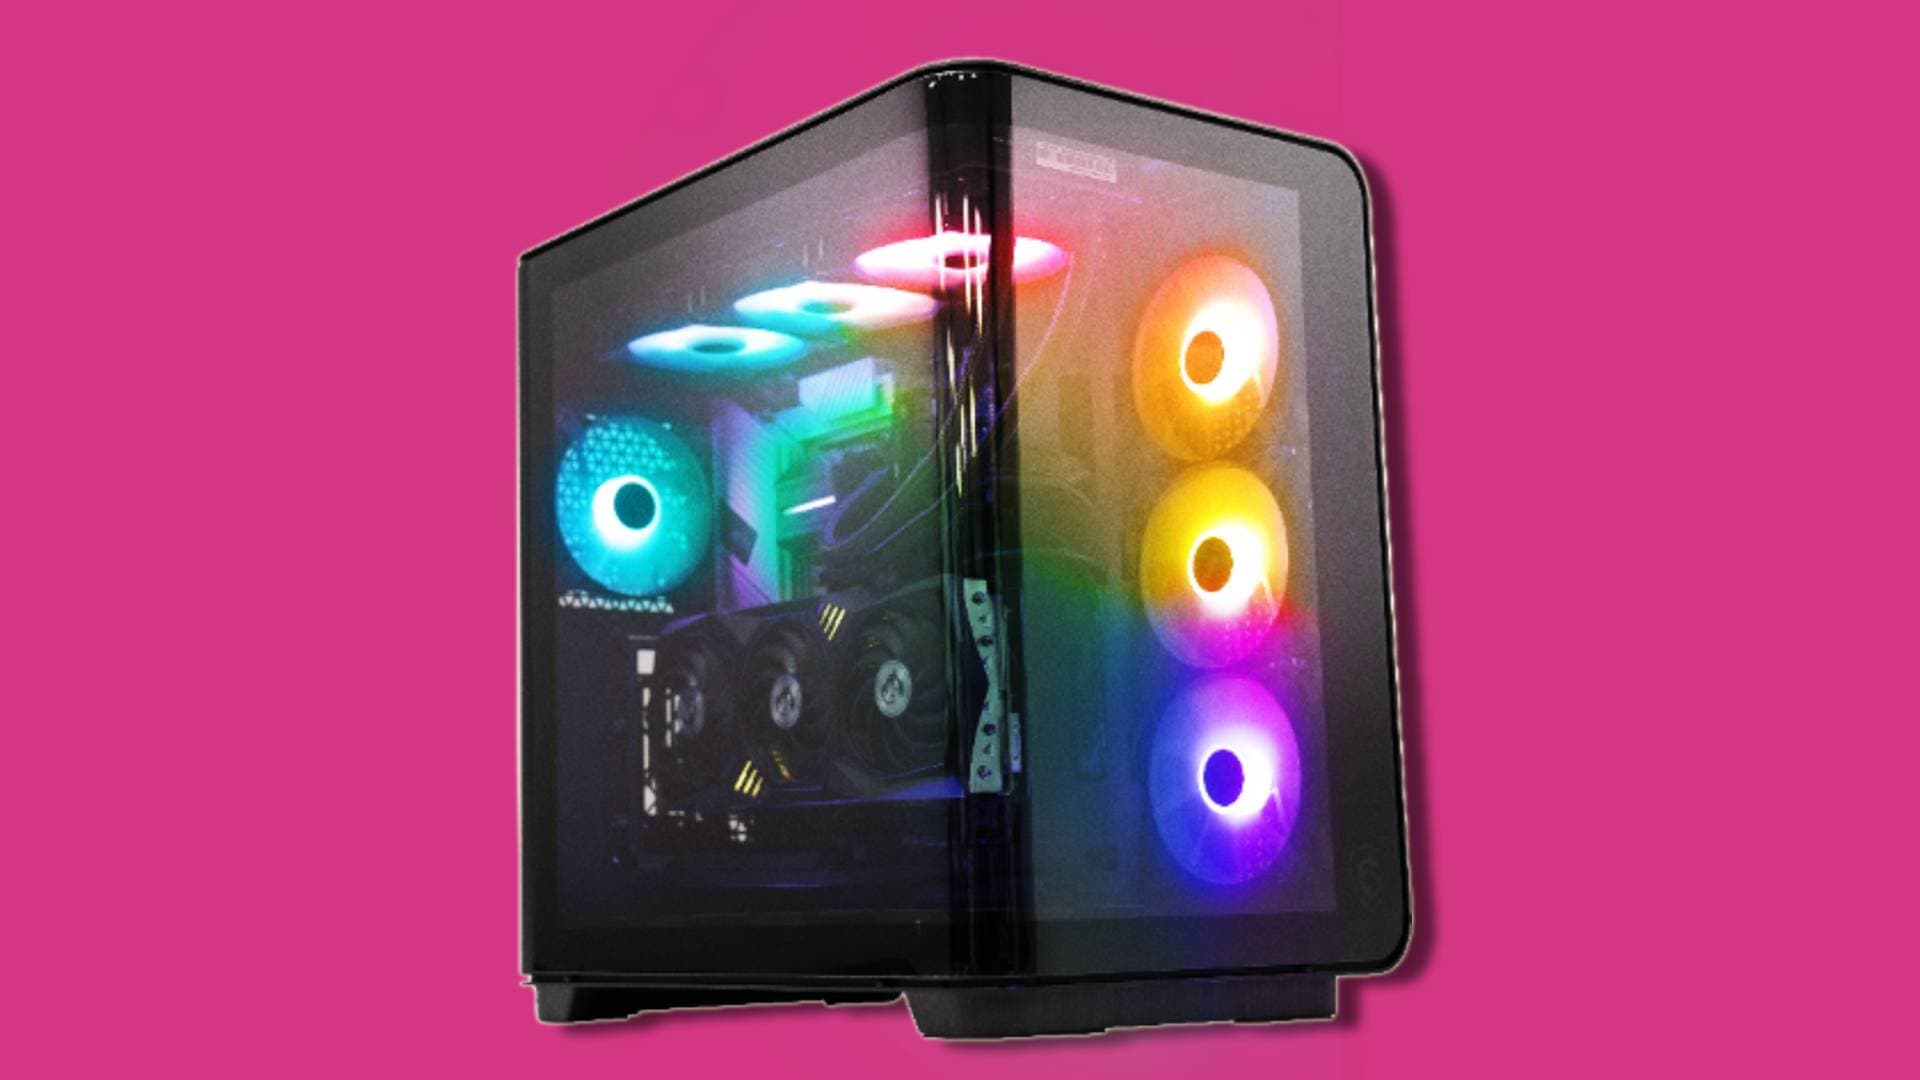 two black gaming PCs against pink background